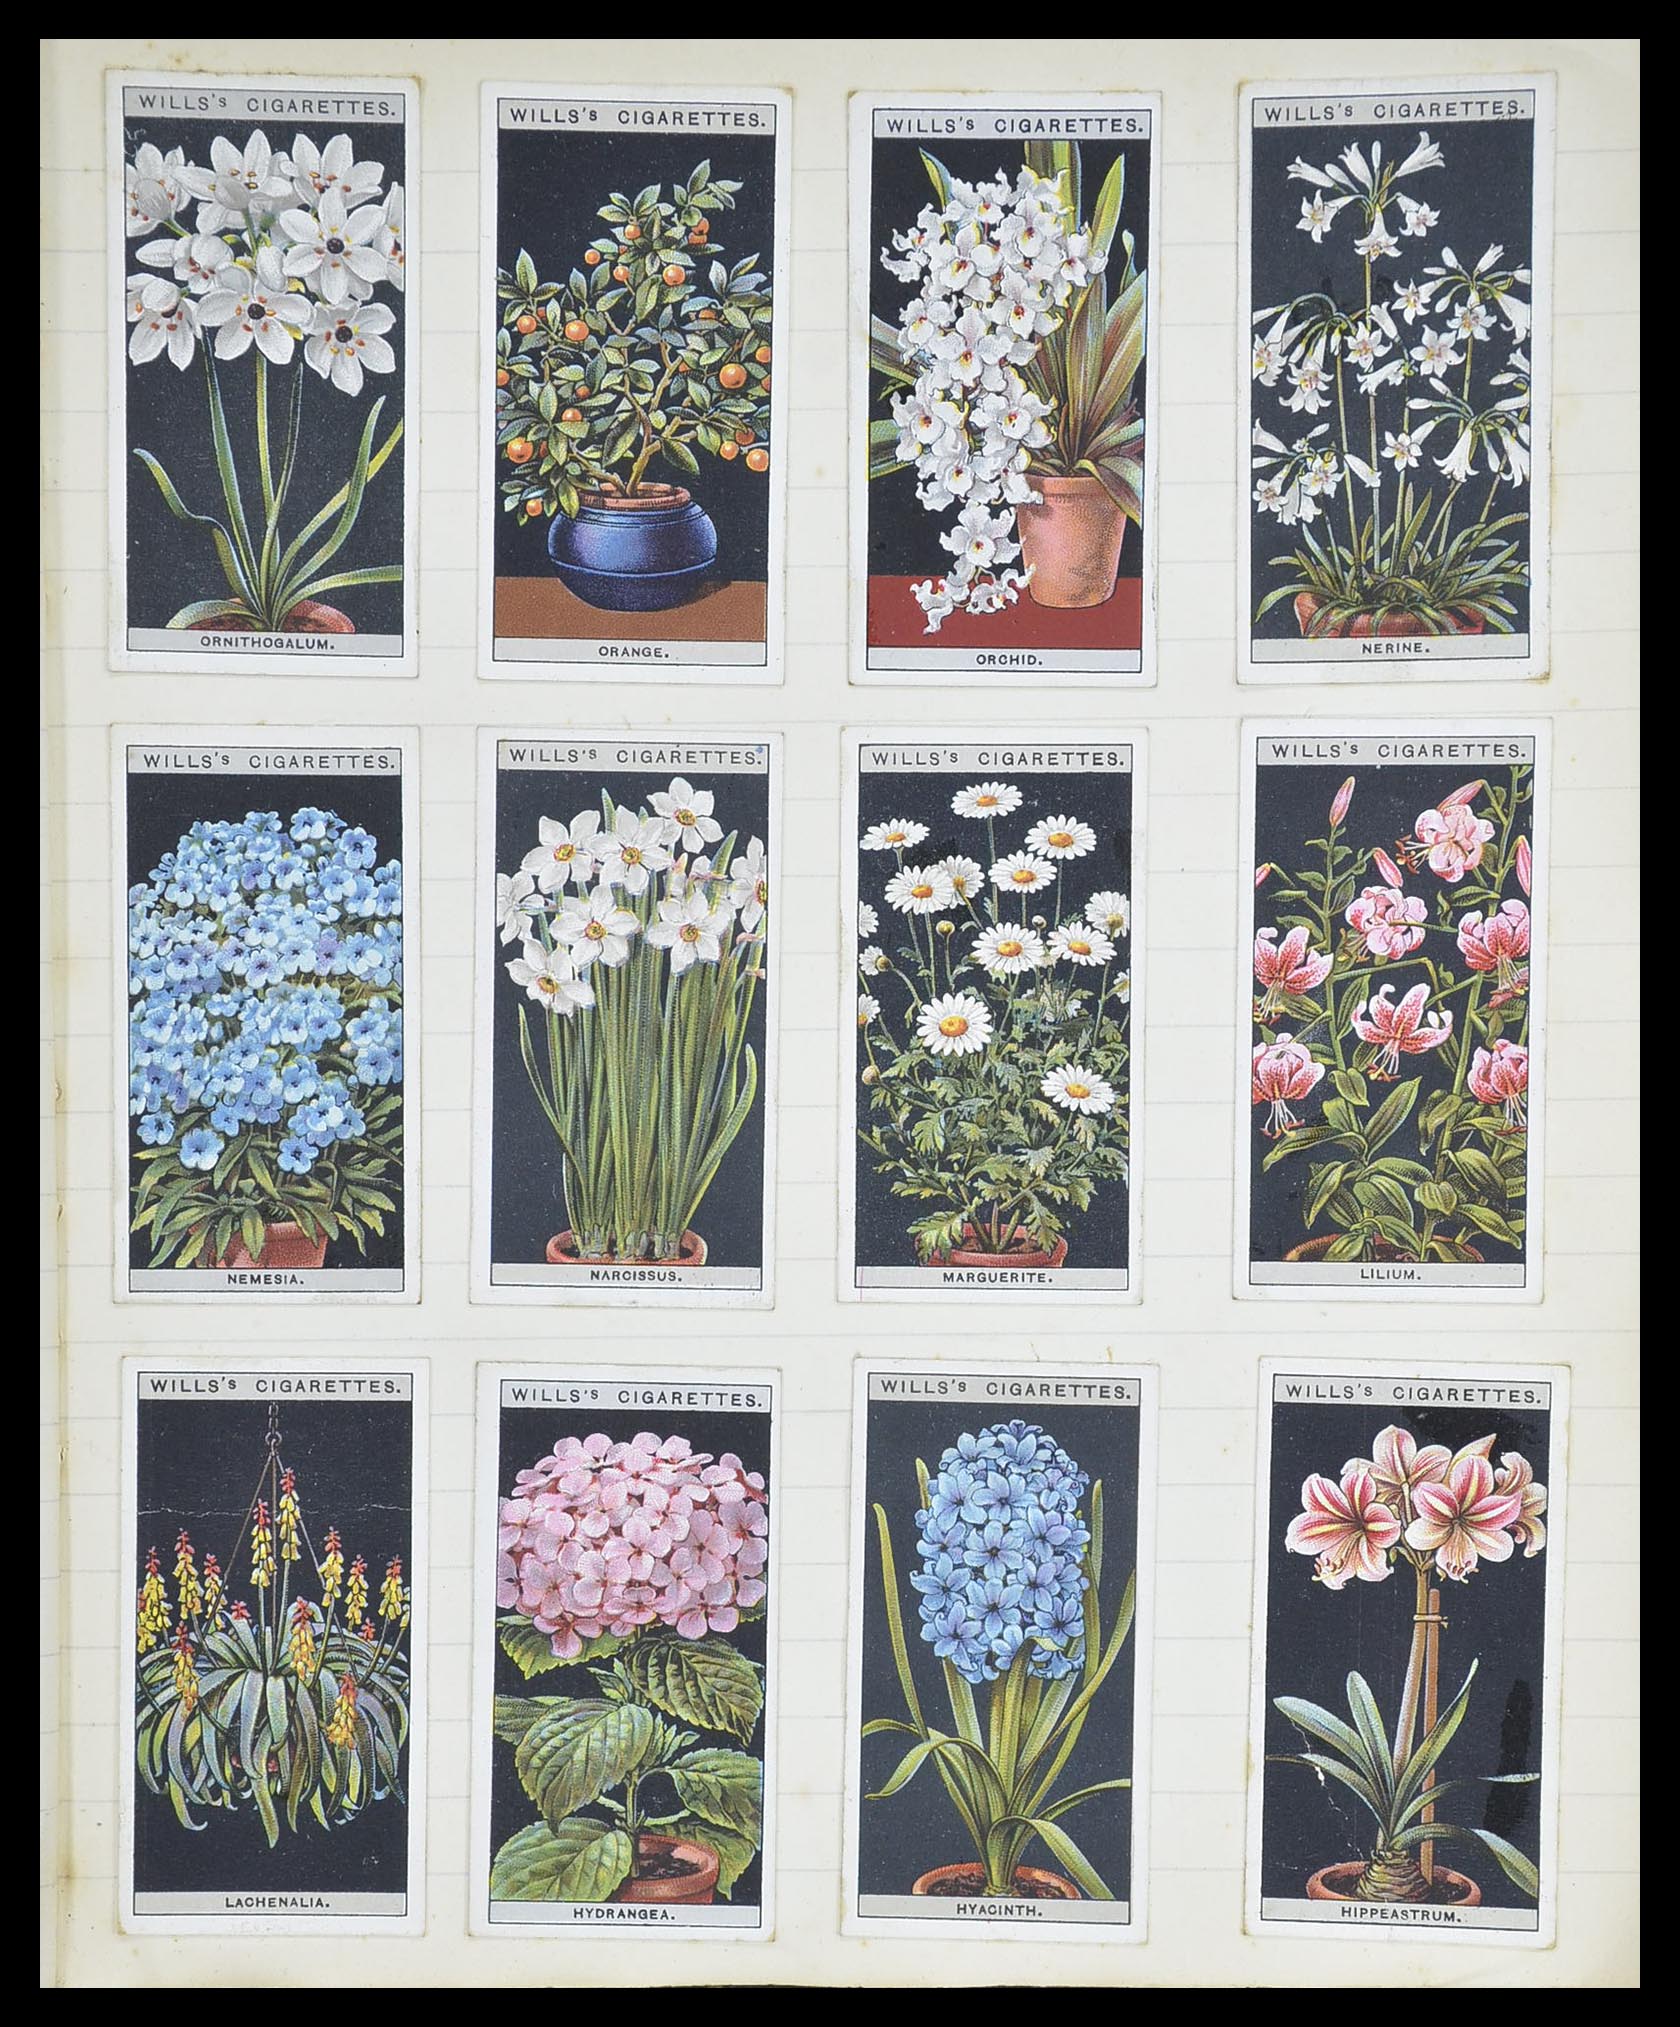 33444 079 - Stamp collection 33444 Great Britain cigarette cards.